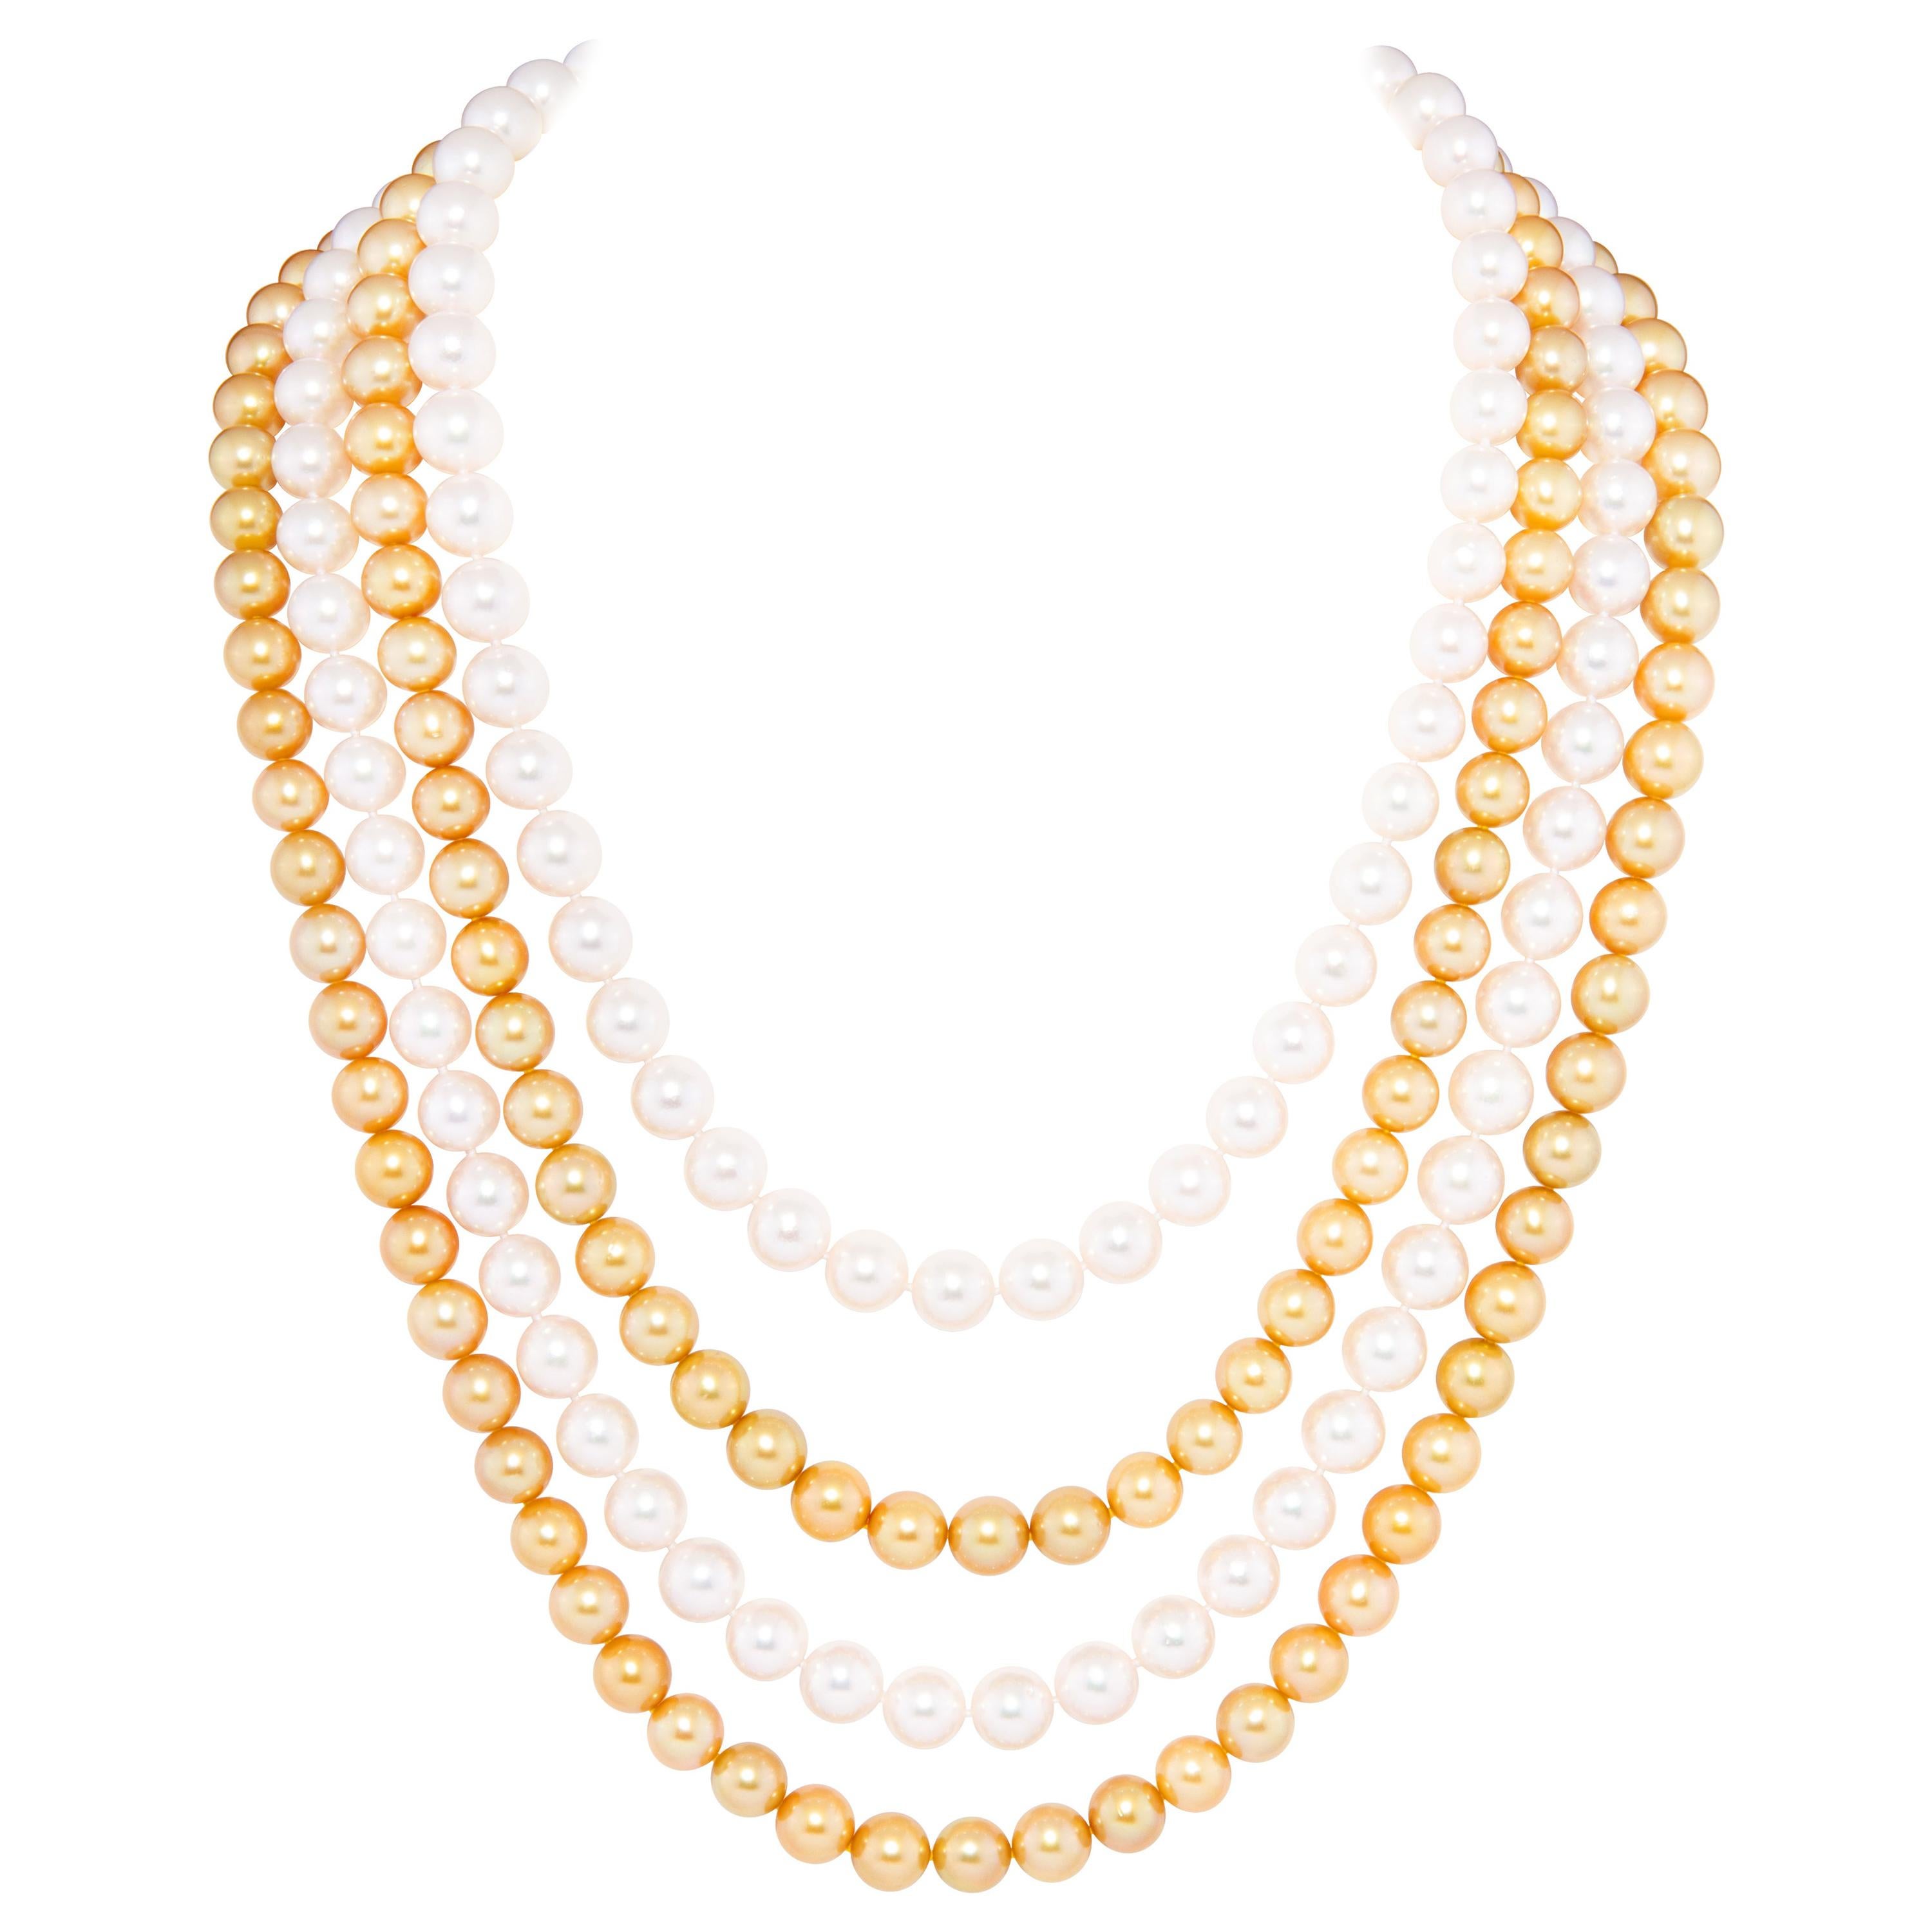 Ella Gafter Very Long White and Golden Pearl Necklace Set